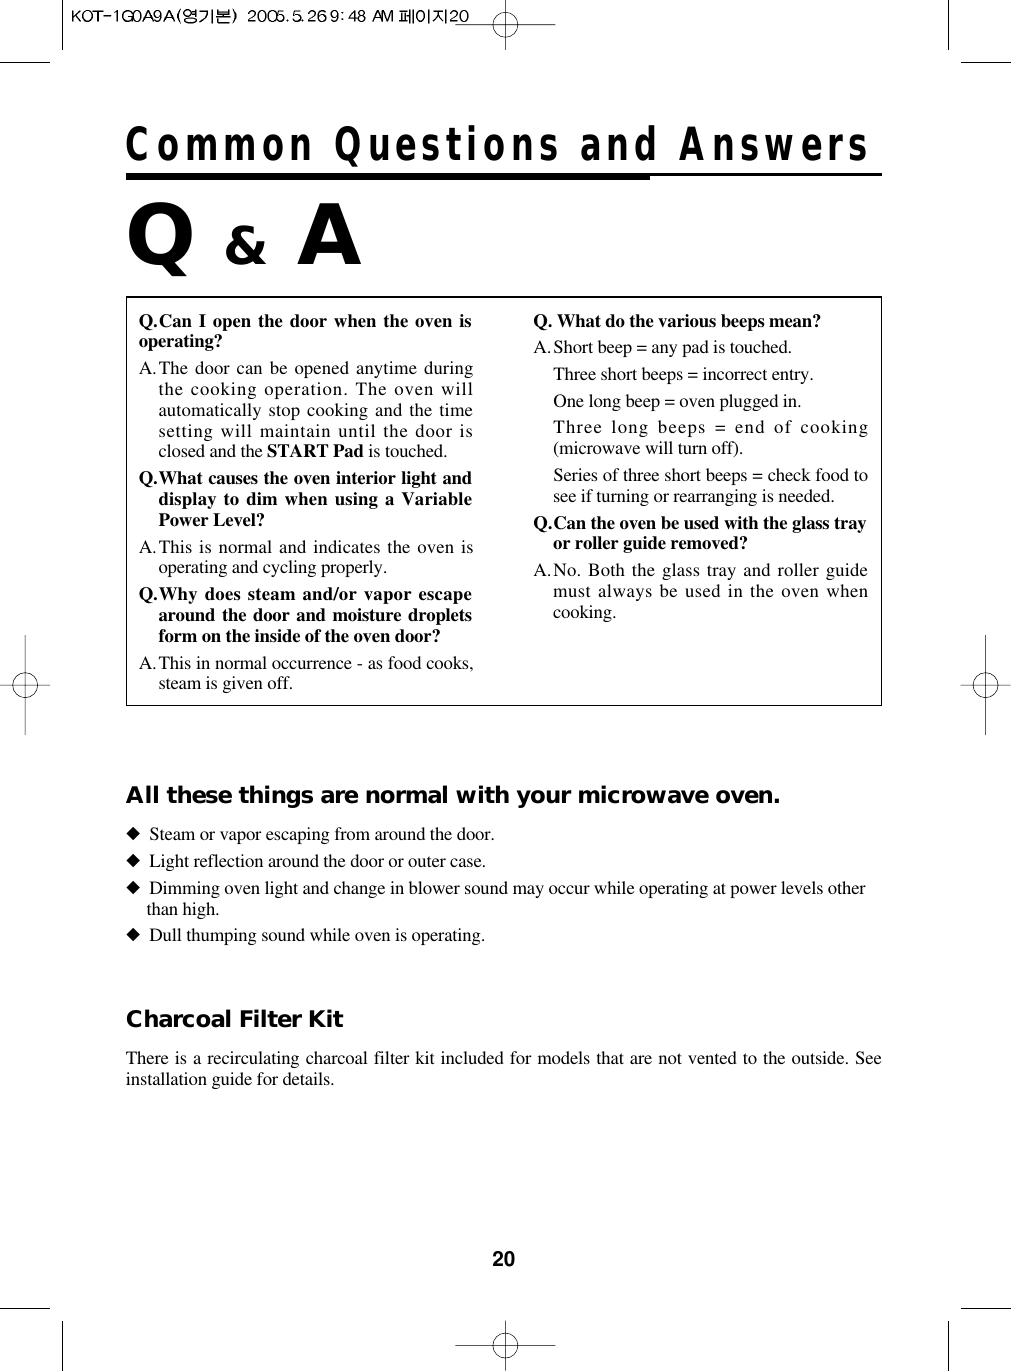 20Common Questions and AnswersQ.Can I open the door when the oven isoperating?A.The door can be opened anytime duringthe cooking operation. The oven willautomatically stop cooking and the timesetting will maintain until the door isclosed and the START Pad is touched.Q.What causes the oven interior light anddisplay to dim when using a VariablePower Level?A.This is normal and indicates the oven isoperating and cycling properly.Q.Why does steam and/or vapor escapearound the door and moisture dropletsform on the inside of the oven door?A.This in normal occurrence - as food cooks,steam is given off.Q. What do the various beeps mean?A.Short beep = any pad is touched.Three short beeps = incorrect entry.One long beep = oven plugged in.Three long beeps = end of cooking(microwave will turn off).Series of three short beeps = check food tosee if turning or rearranging is needed.Q.Can the oven be used with the glass trayor roller guide removed?A.No. Both the glass tray and roller guidemust always be used in the oven whencooking.Q &amp;A◆Steam or vapor escaping from around the door.◆Light reflection around the door or outer case.◆Dimming oven light and change in blower sound may occur while operating at power levels otherthan high.◆Dull thumping sound while oven is operating.All these things are normal with your microwave oven.There is a recirculating charcoal filter kit included for models that are not vented to the outside. Seeinstallation guide for details.Charcoal Filter Kit